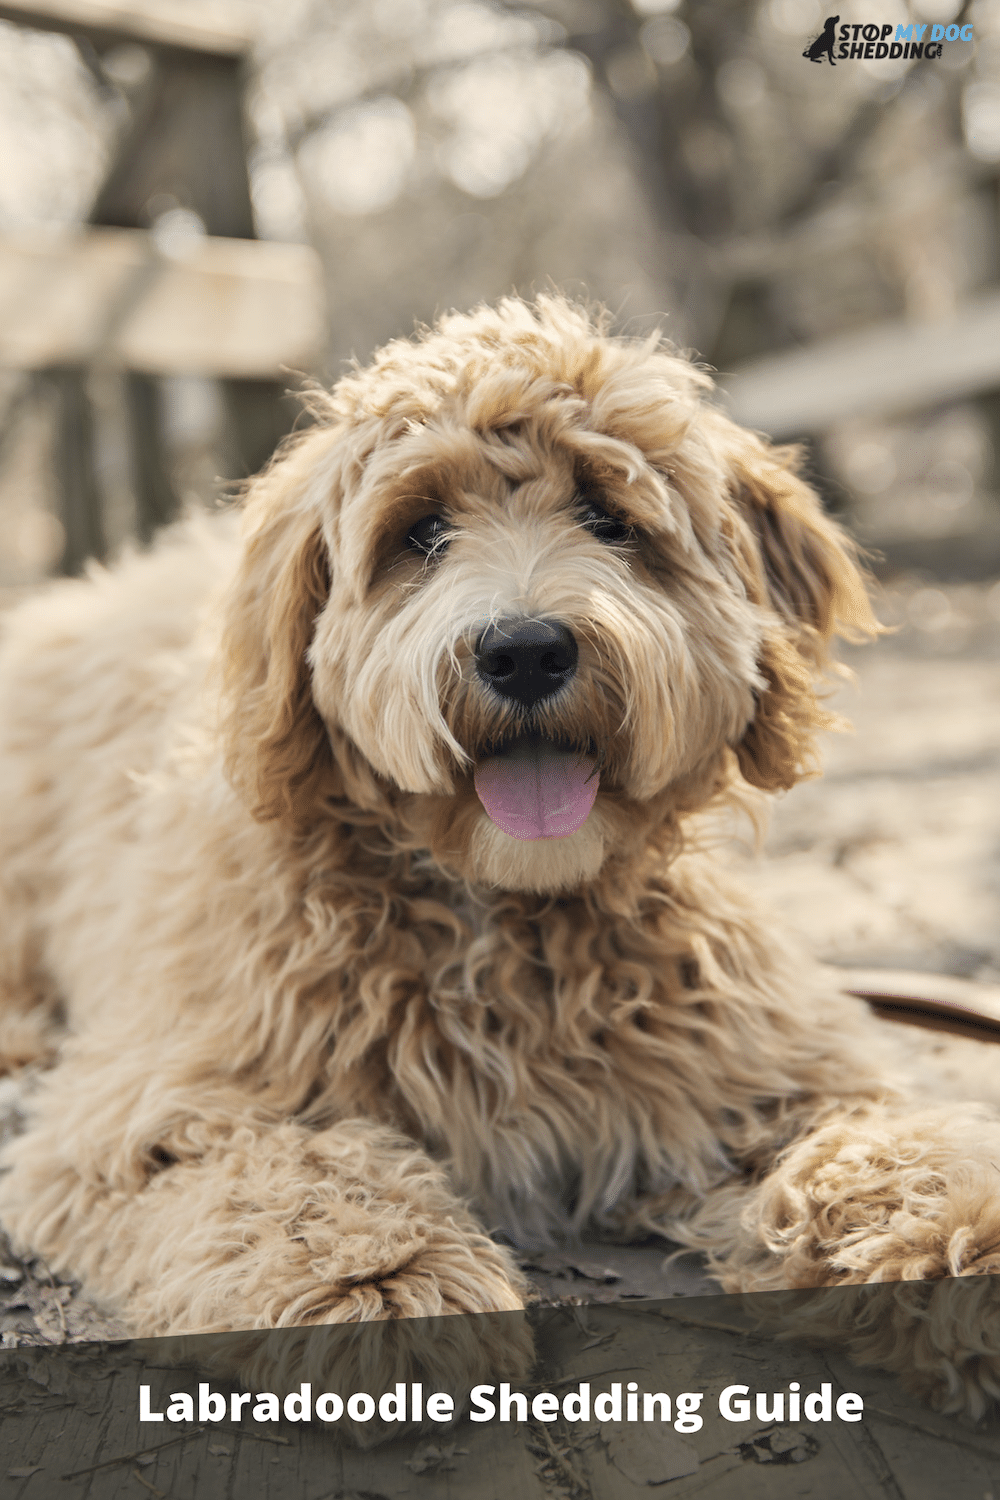 Do Labradoodles Shed Much Hair? (All You Need to Know)